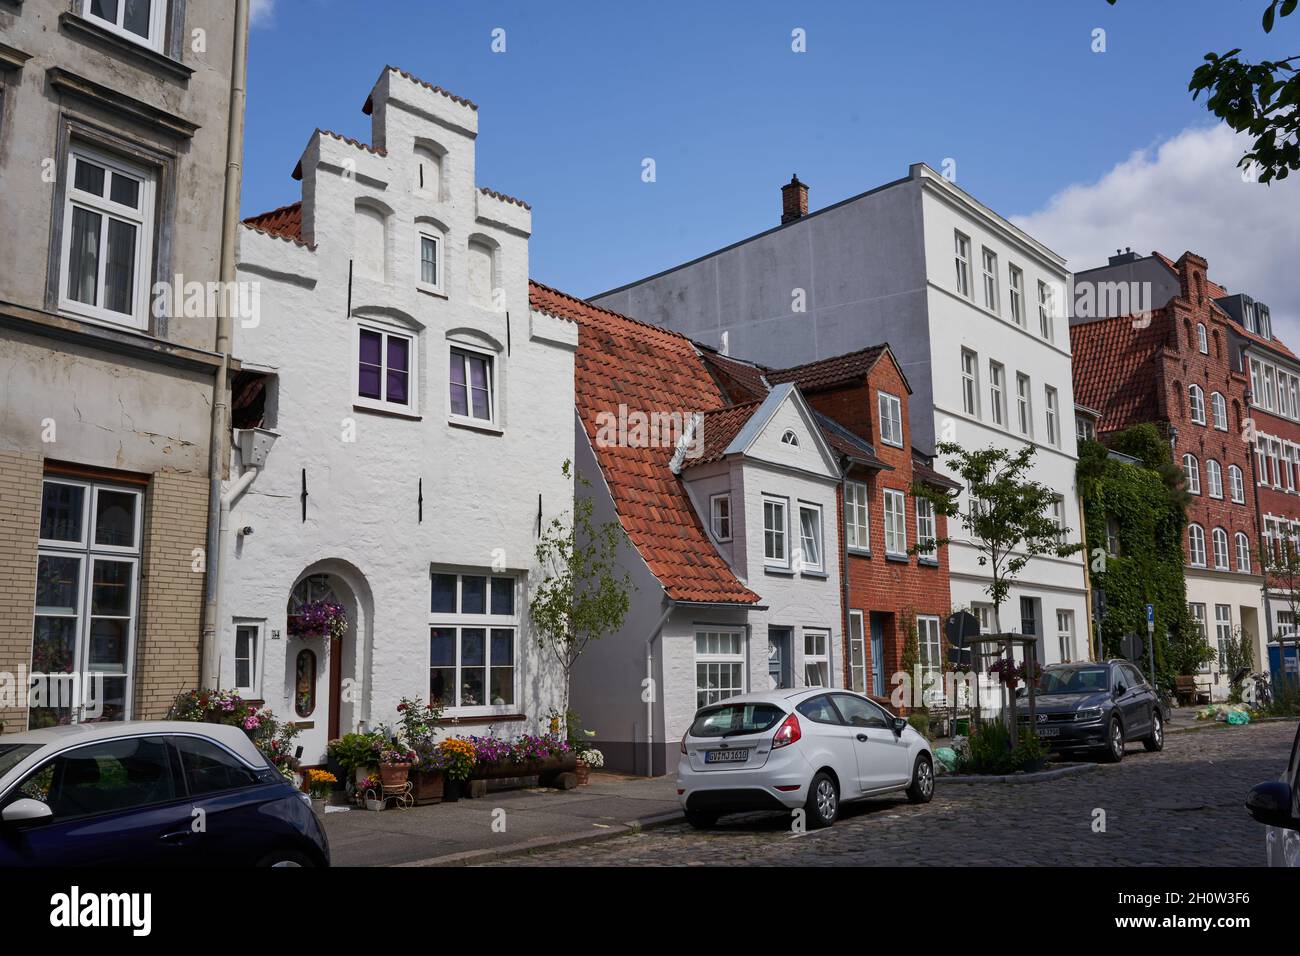 Luebeck, Germany - July 20, 2021 - a typical crow-stepped gabled town house Stock Photo